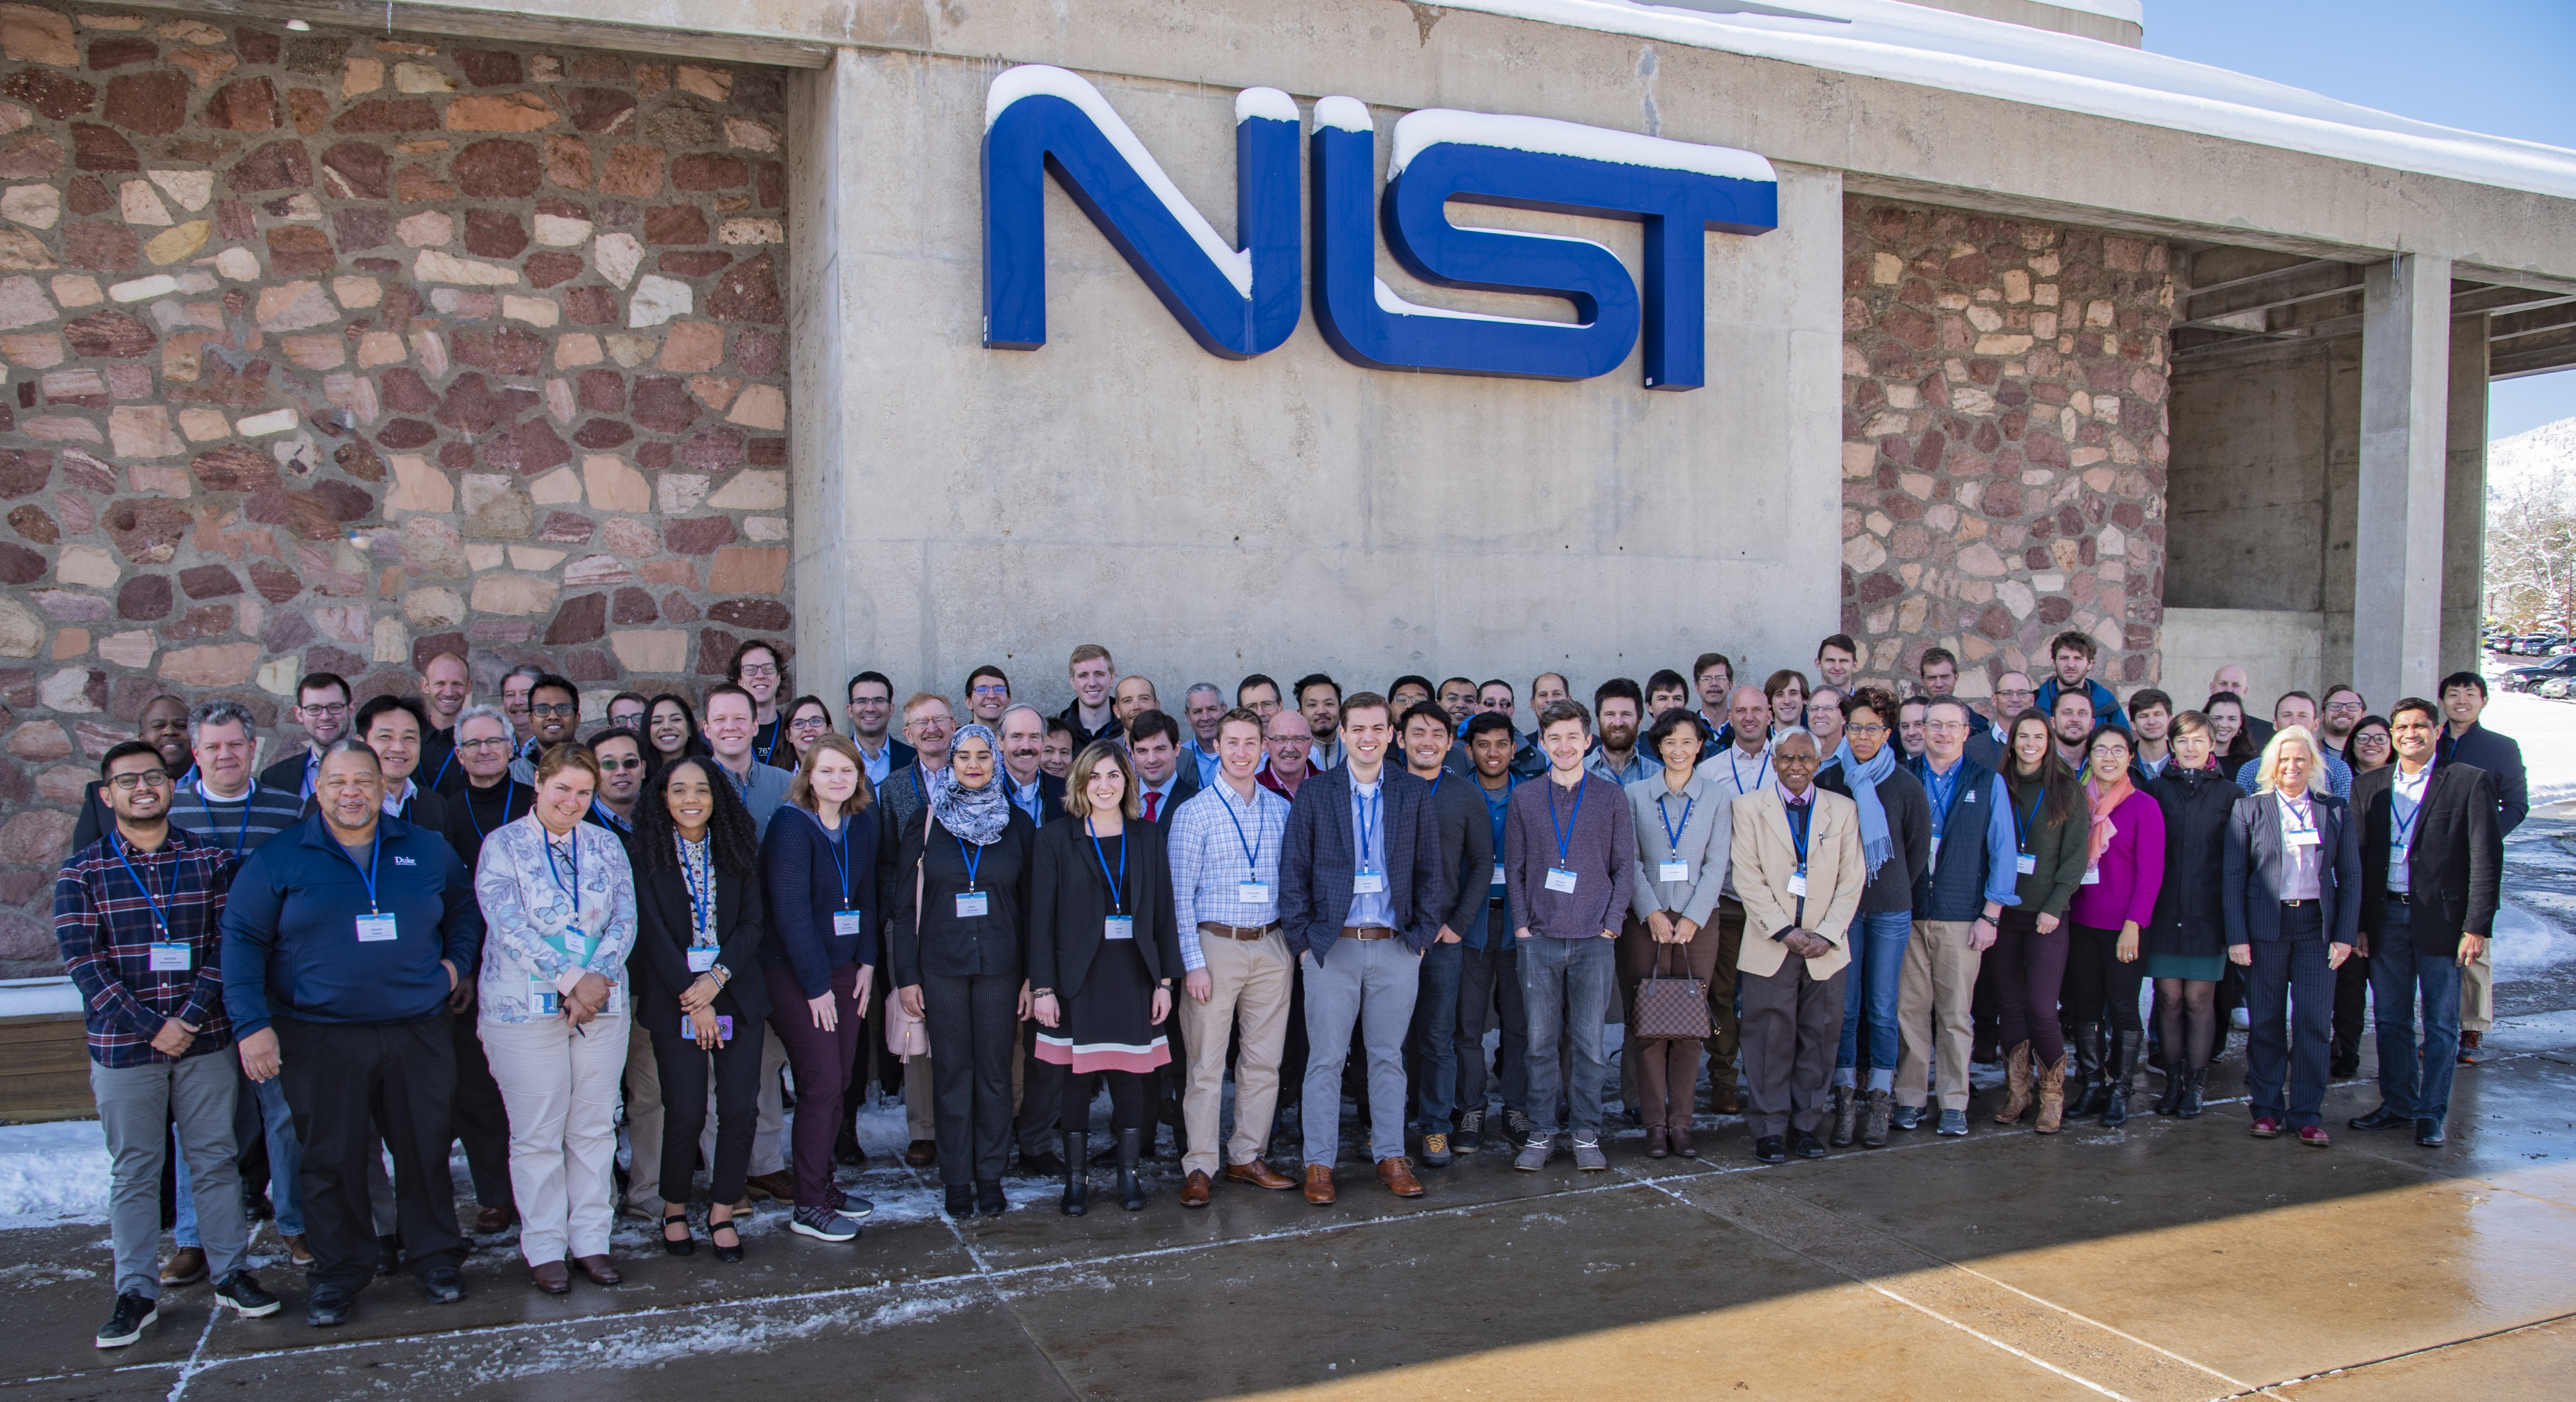 Attendees of PAM2019 outside the NIST facility. Photo via NIST.